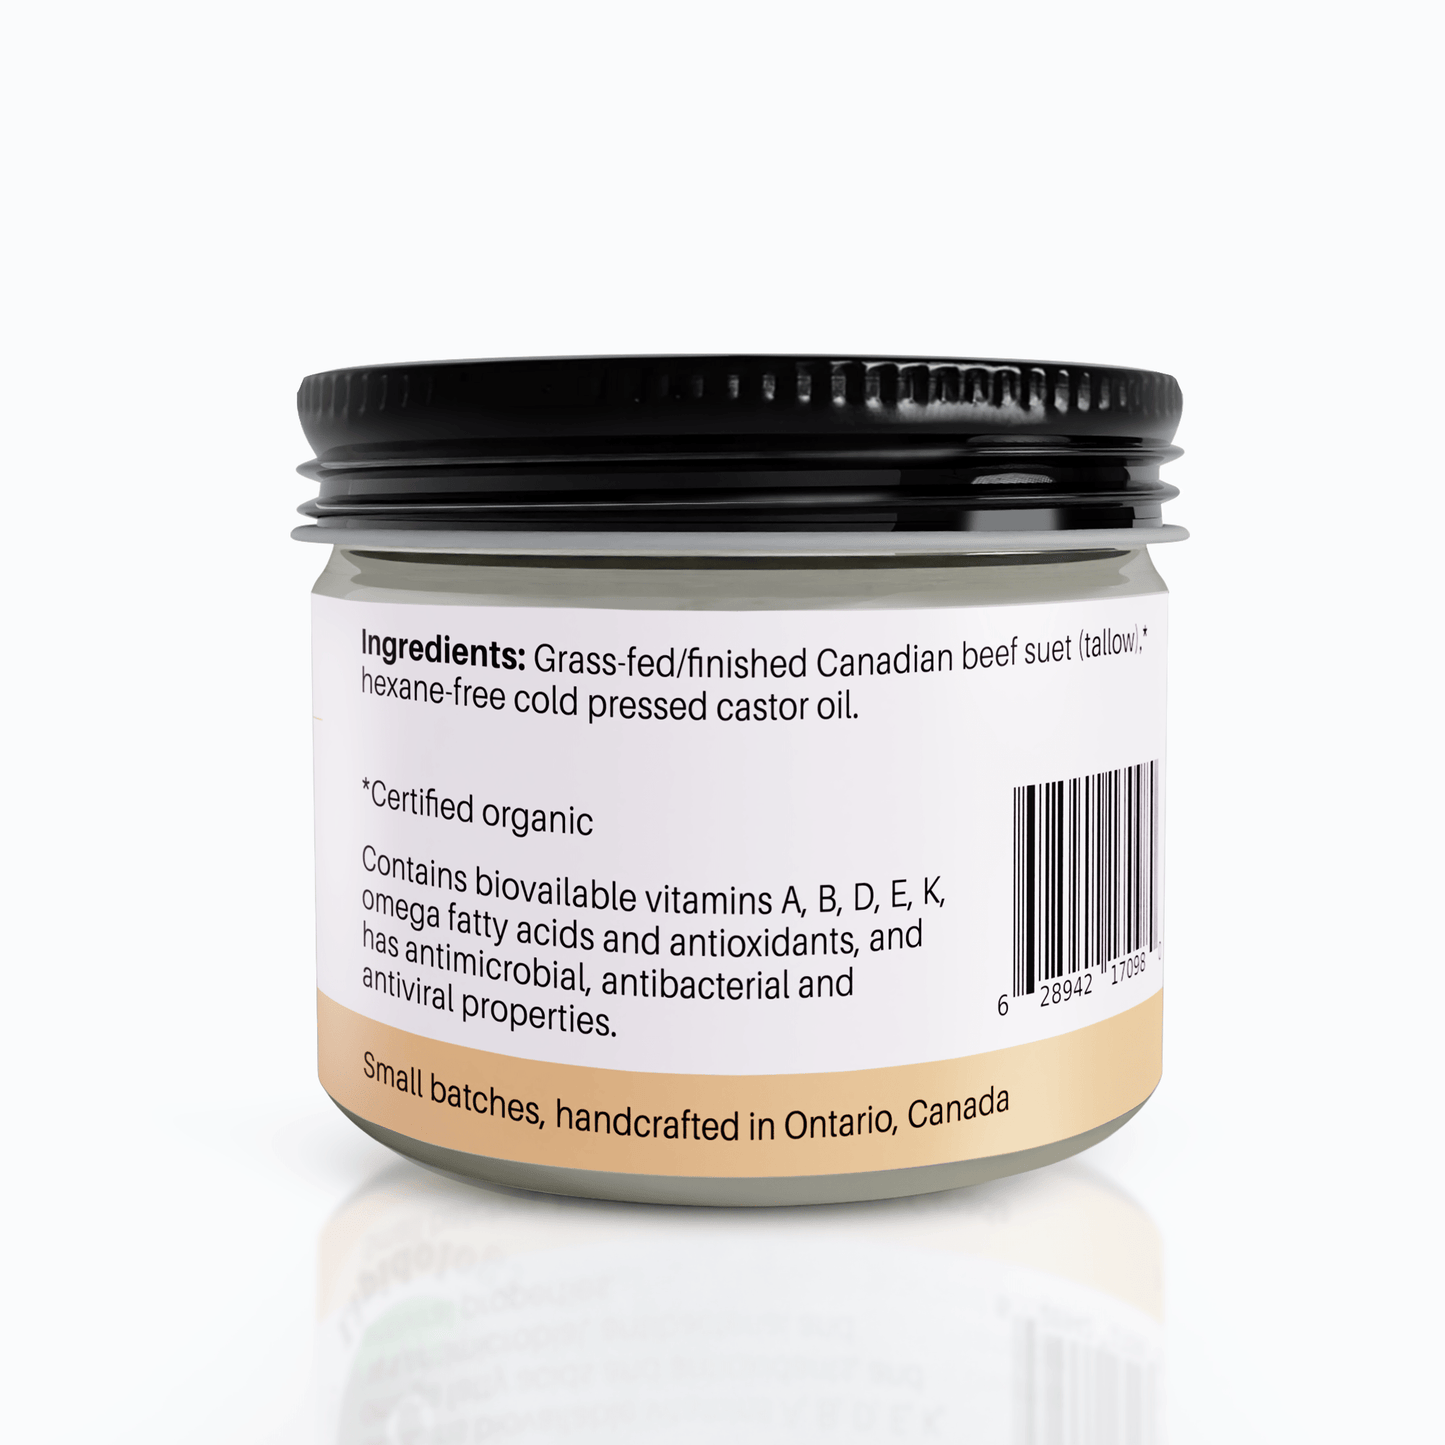 Nude Face and Body Cream, Unscented, Organic Grass-Fed/Finished Tallow, 60 ml